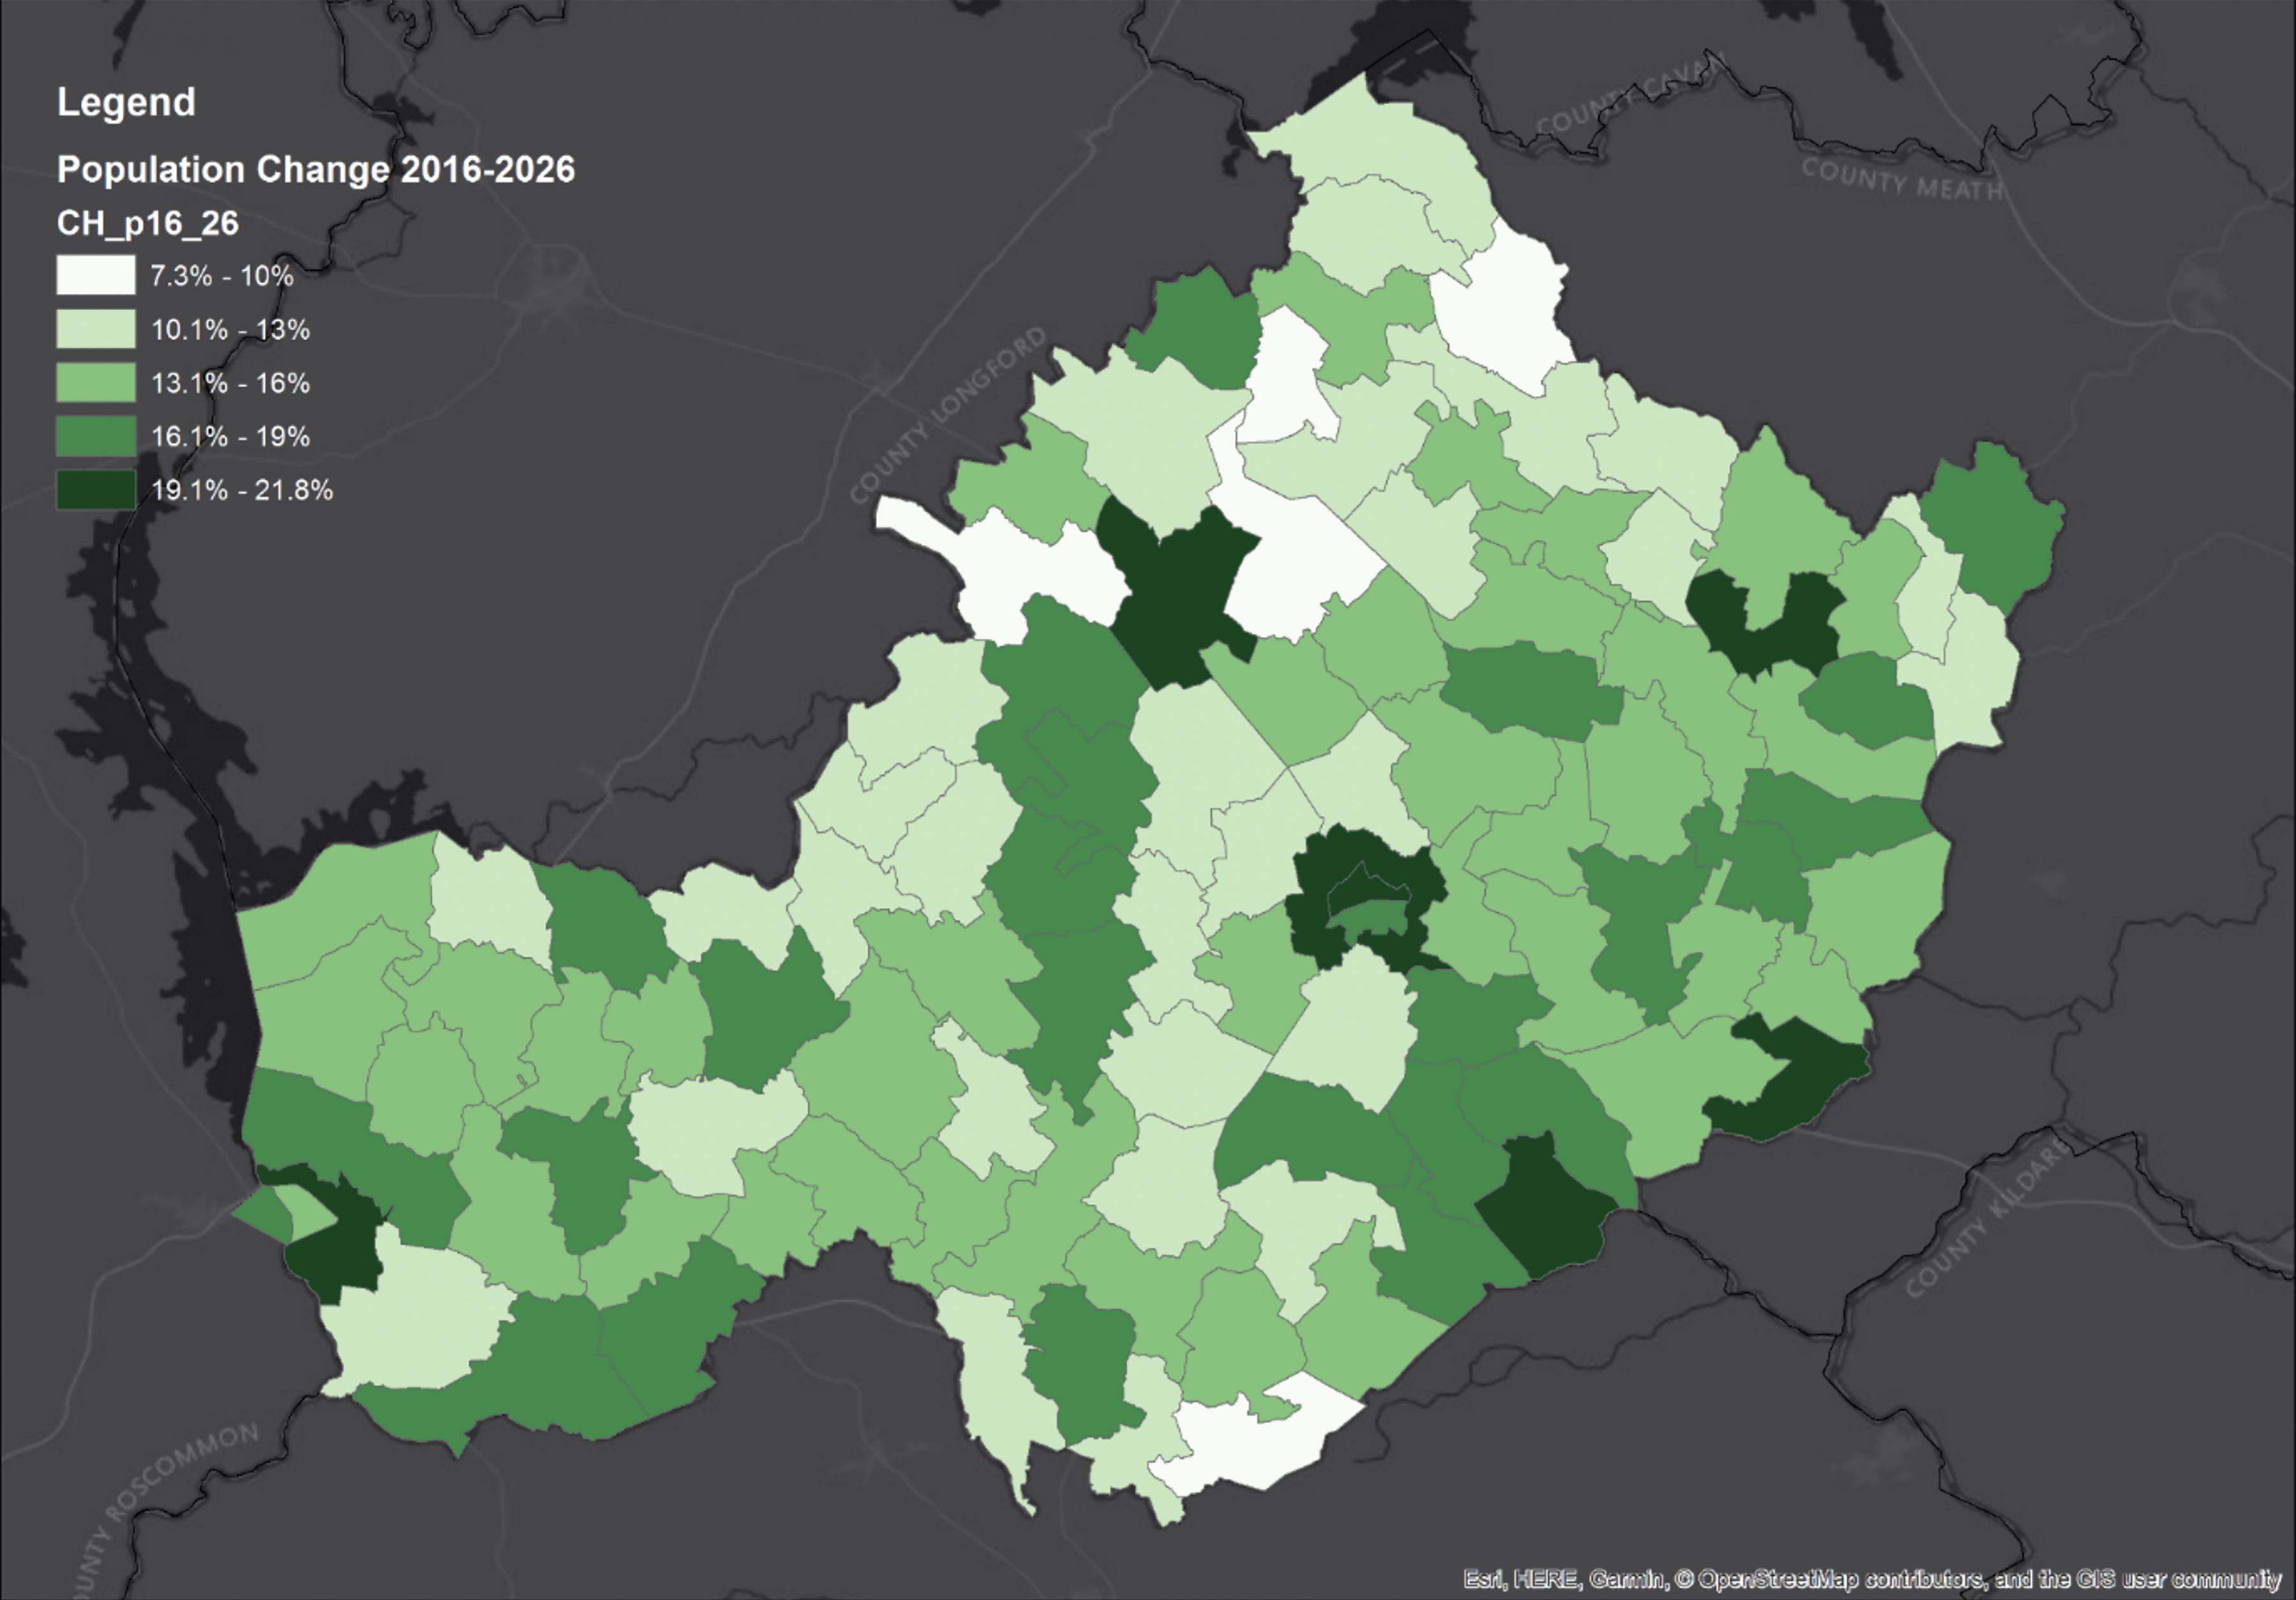 Figure 2.10: Projected Population Change in Westmeath 2016-2026